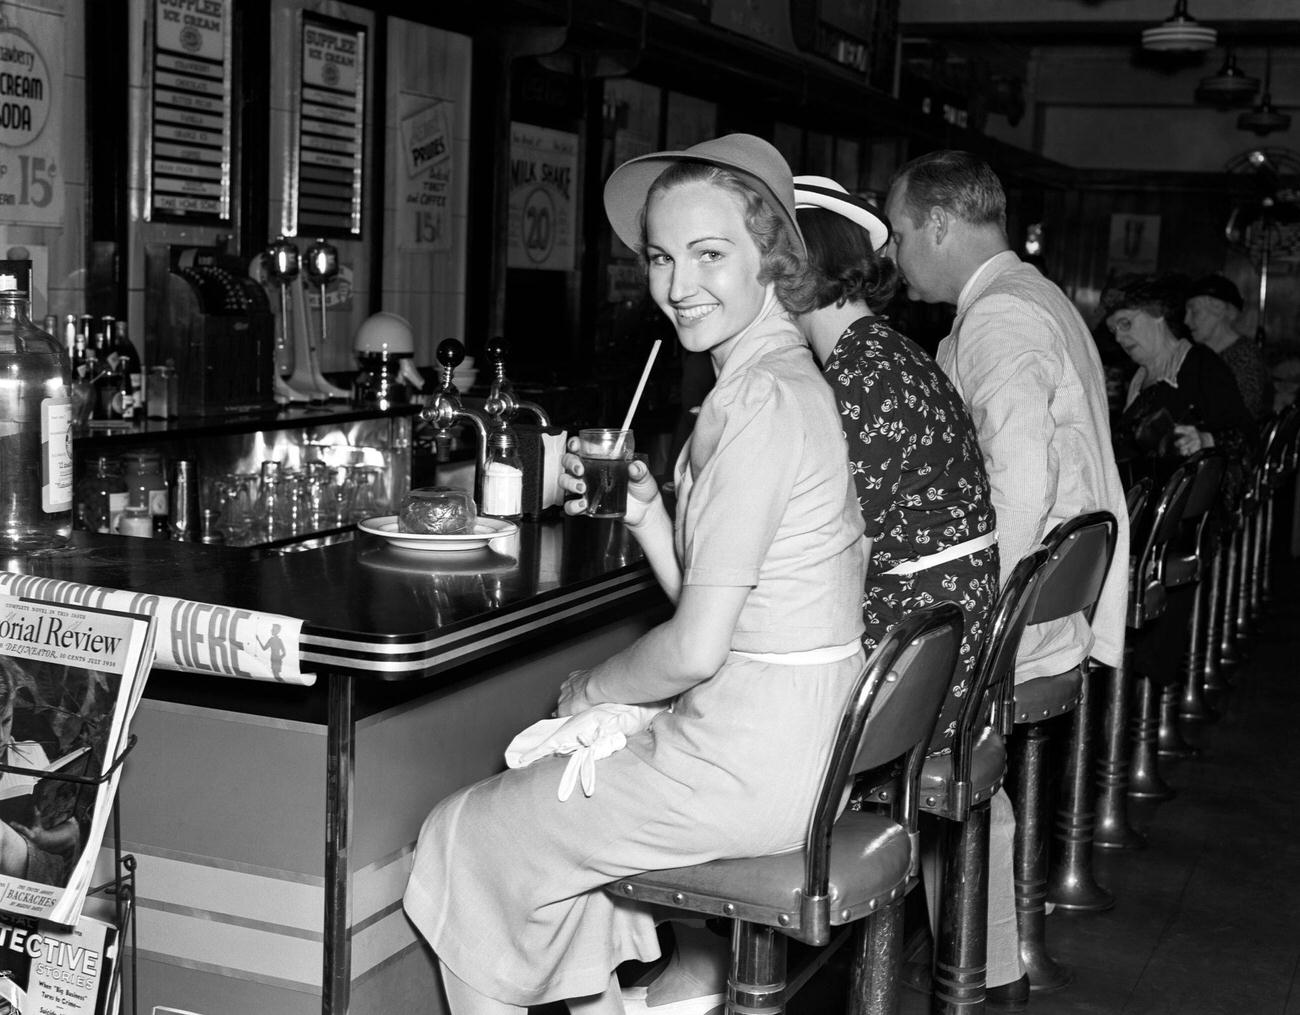 Smiling women in linen dresses with a glass of cola at a soda fountain, 1940s.